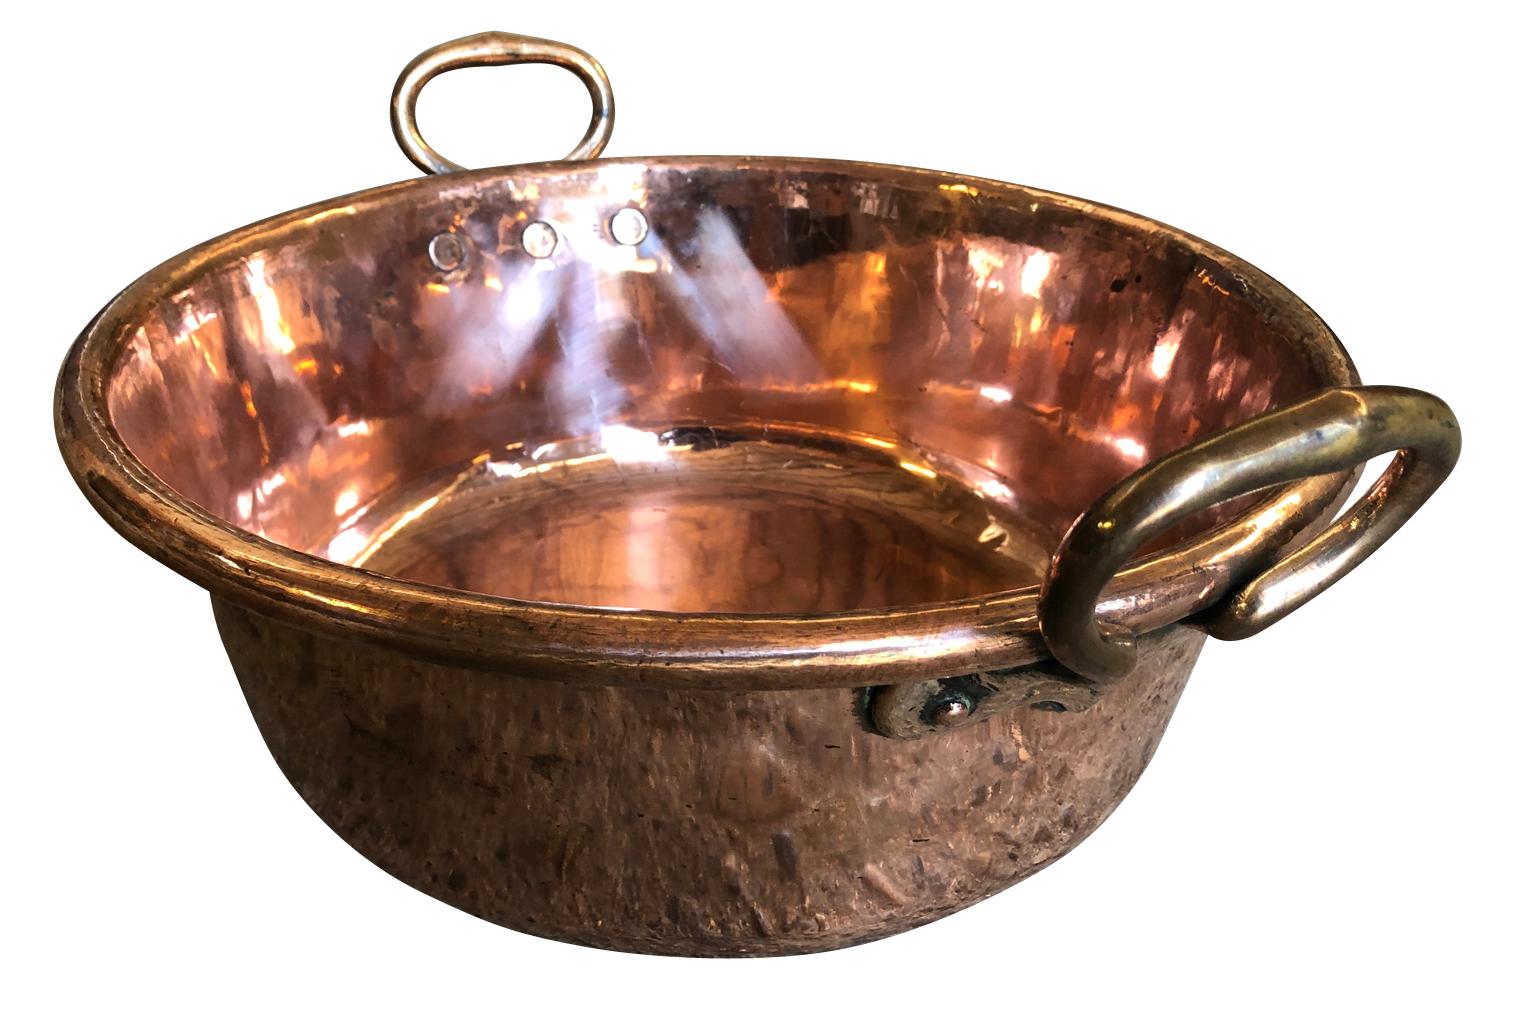 A lovely 18th century copper pan from the South of France. A wonderful accent piece for any kitchen or living area.